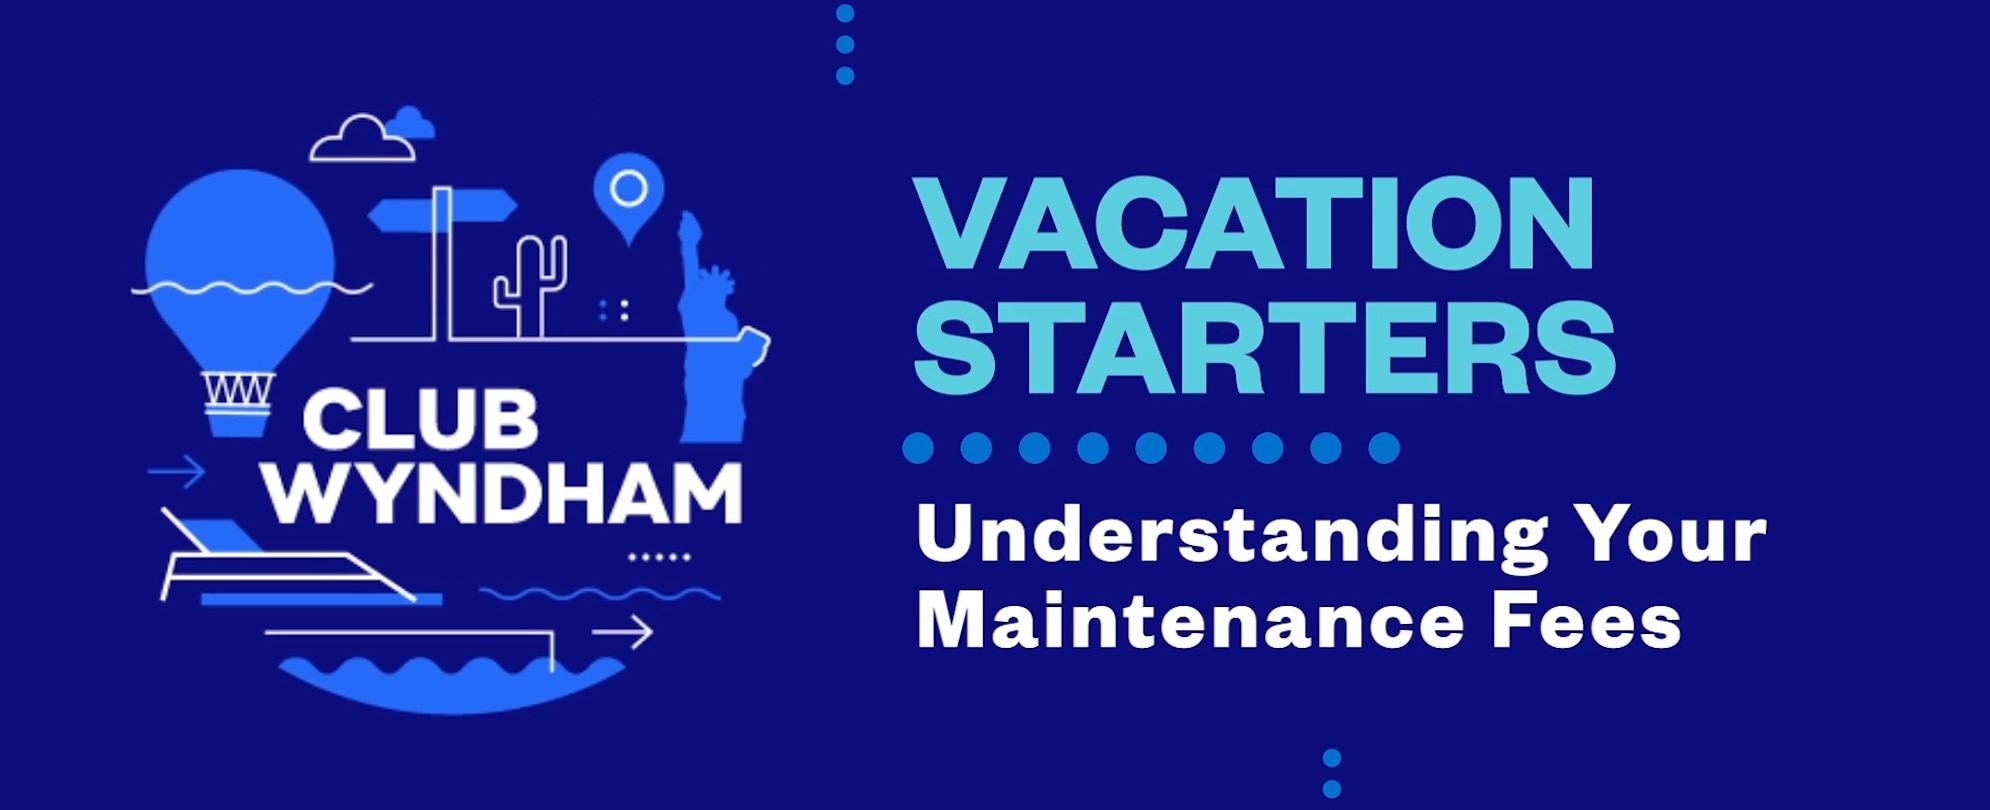 Understanding Your Maintenance Fees overview from the Club Wyndham Vacation Starters video series